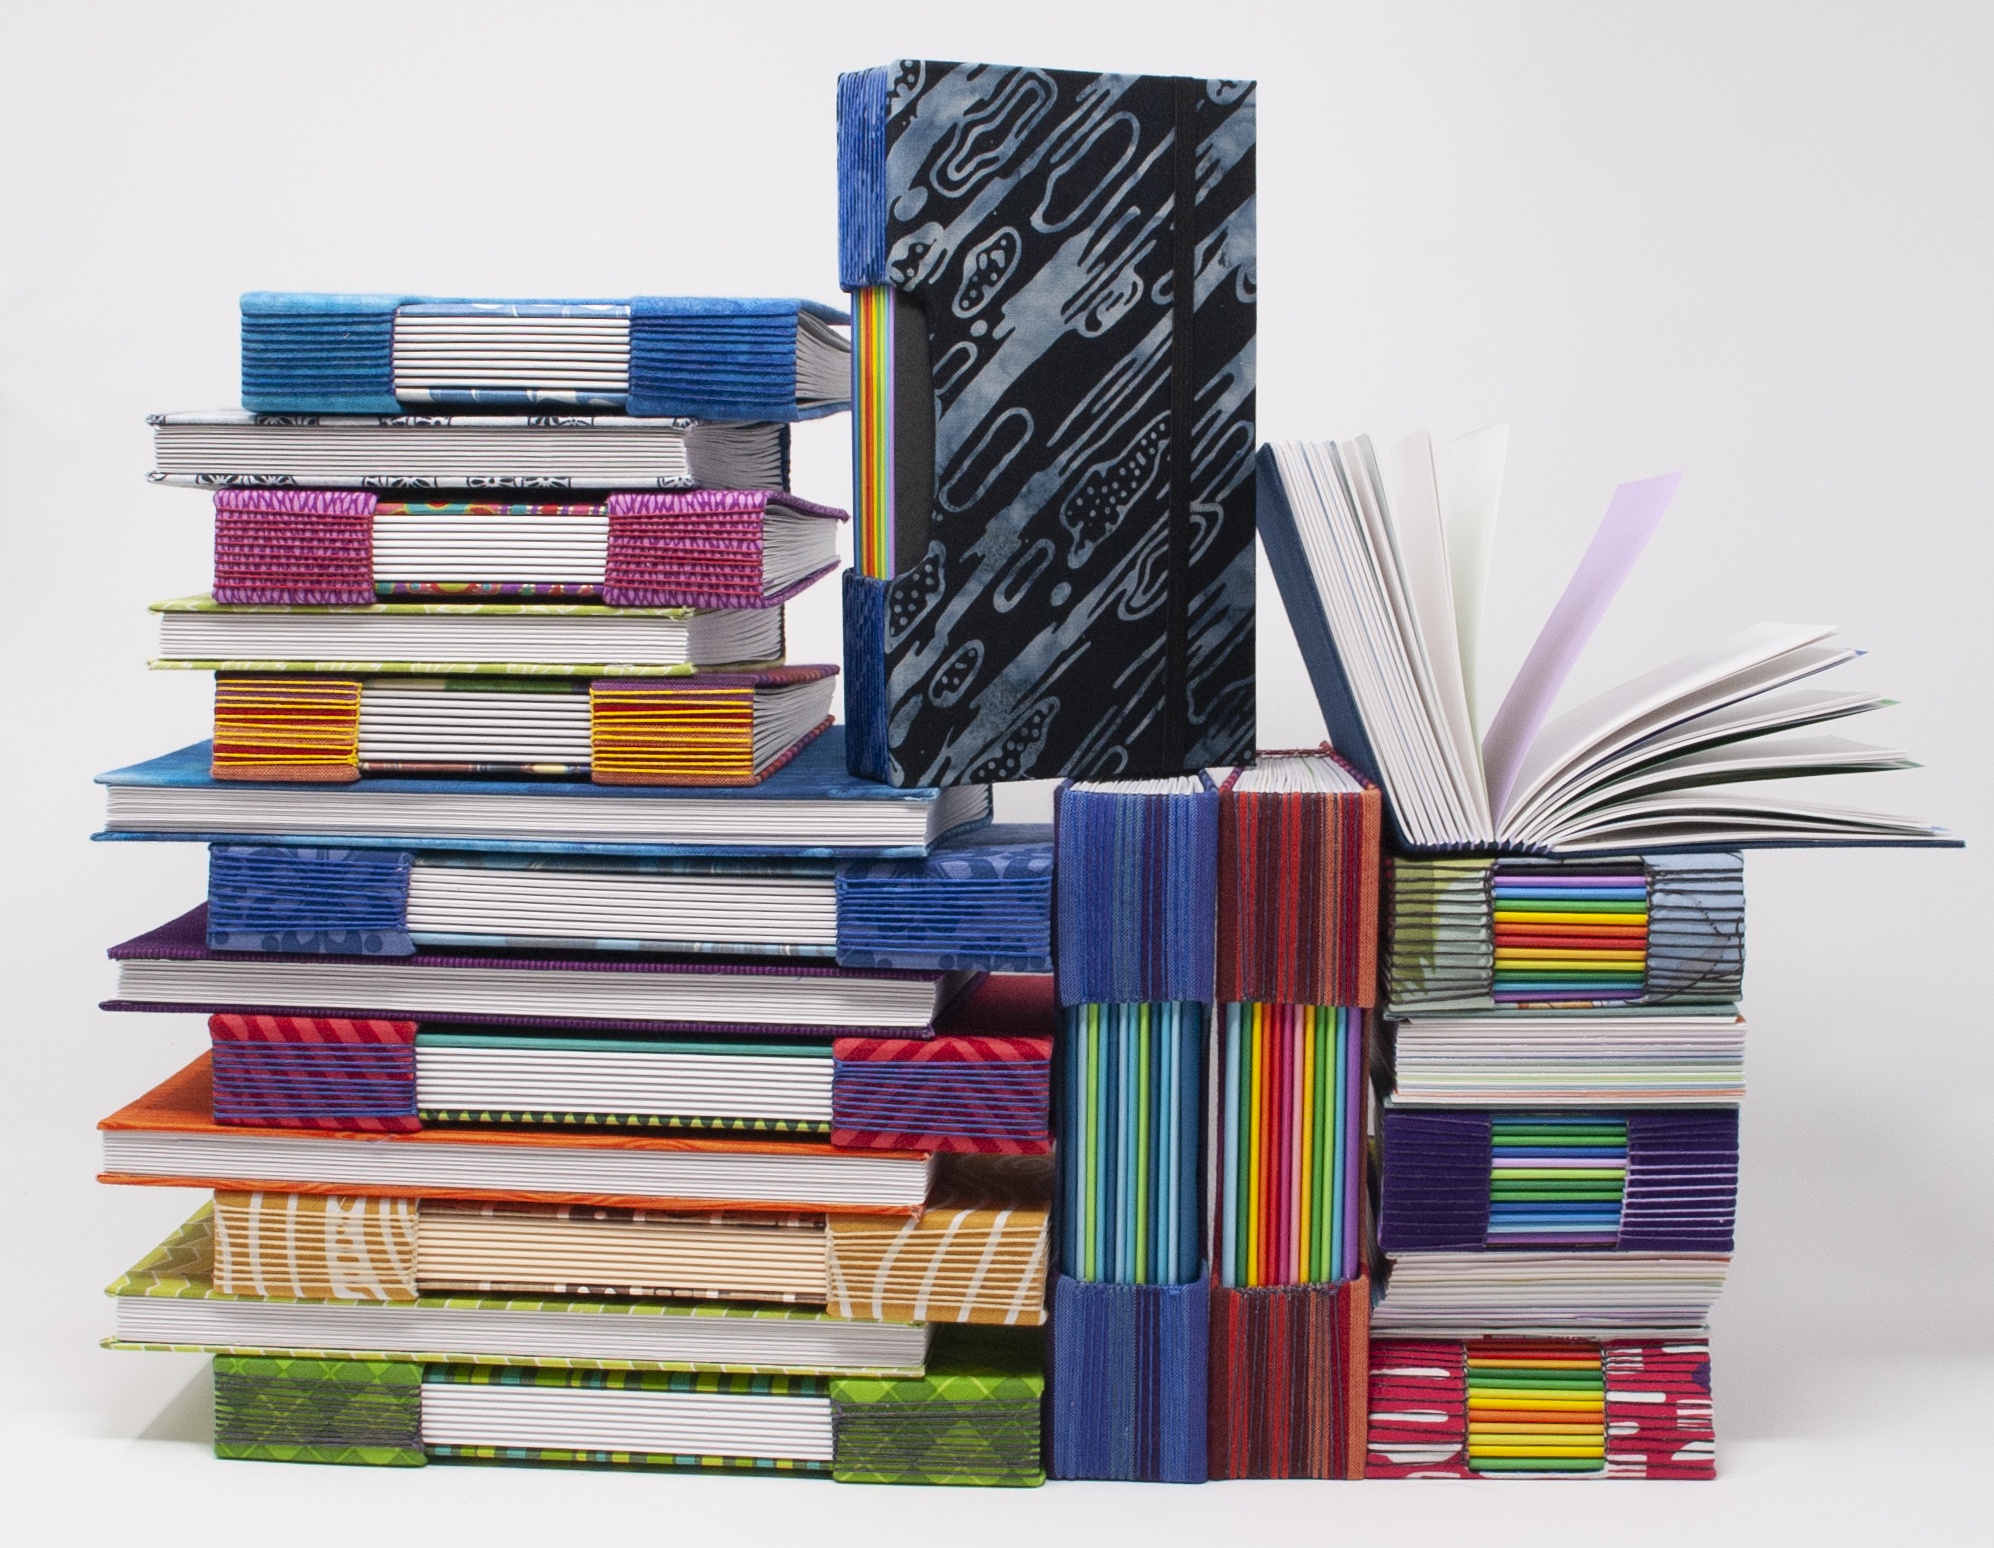 A menagerie of hand-bound books